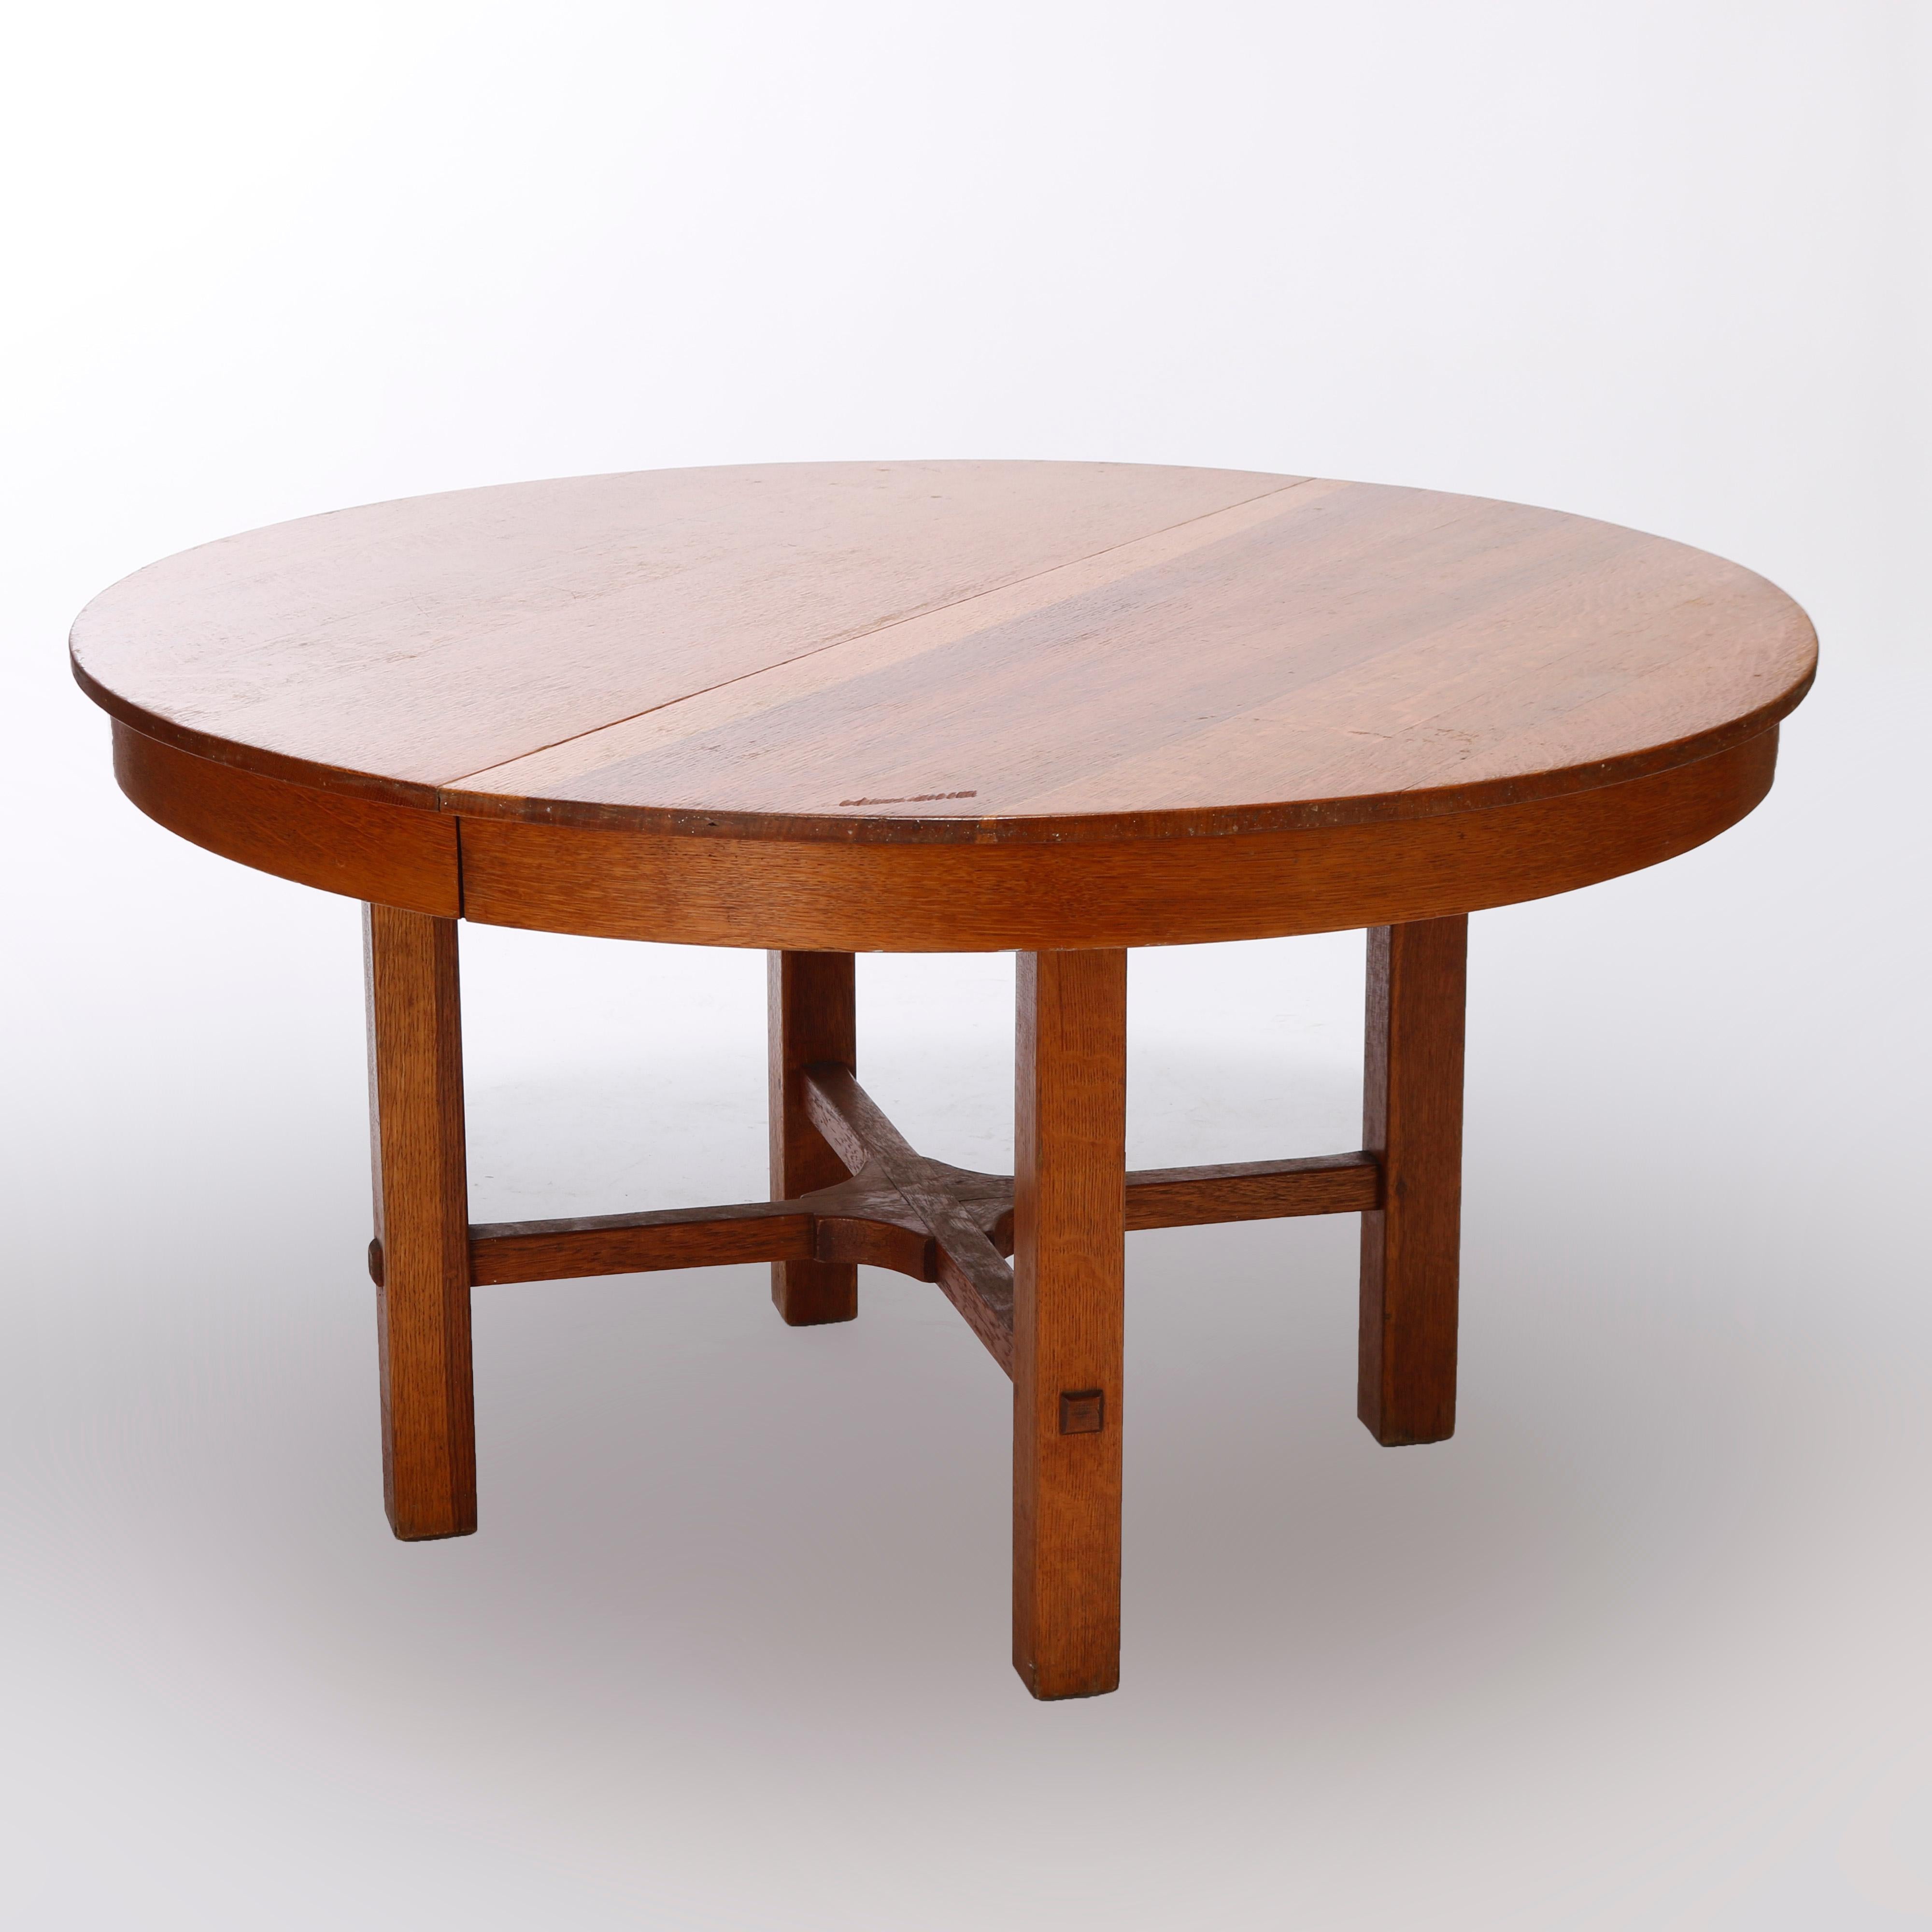 An Arts & Crafts extension dining table, Work of L & JG Stickley, offers oak construction in round form with straight legs having x-form stretcher, extends to accept single leaf, c1950

Measures - 39.75'' H x 54.25'' W x 54.25'' D.